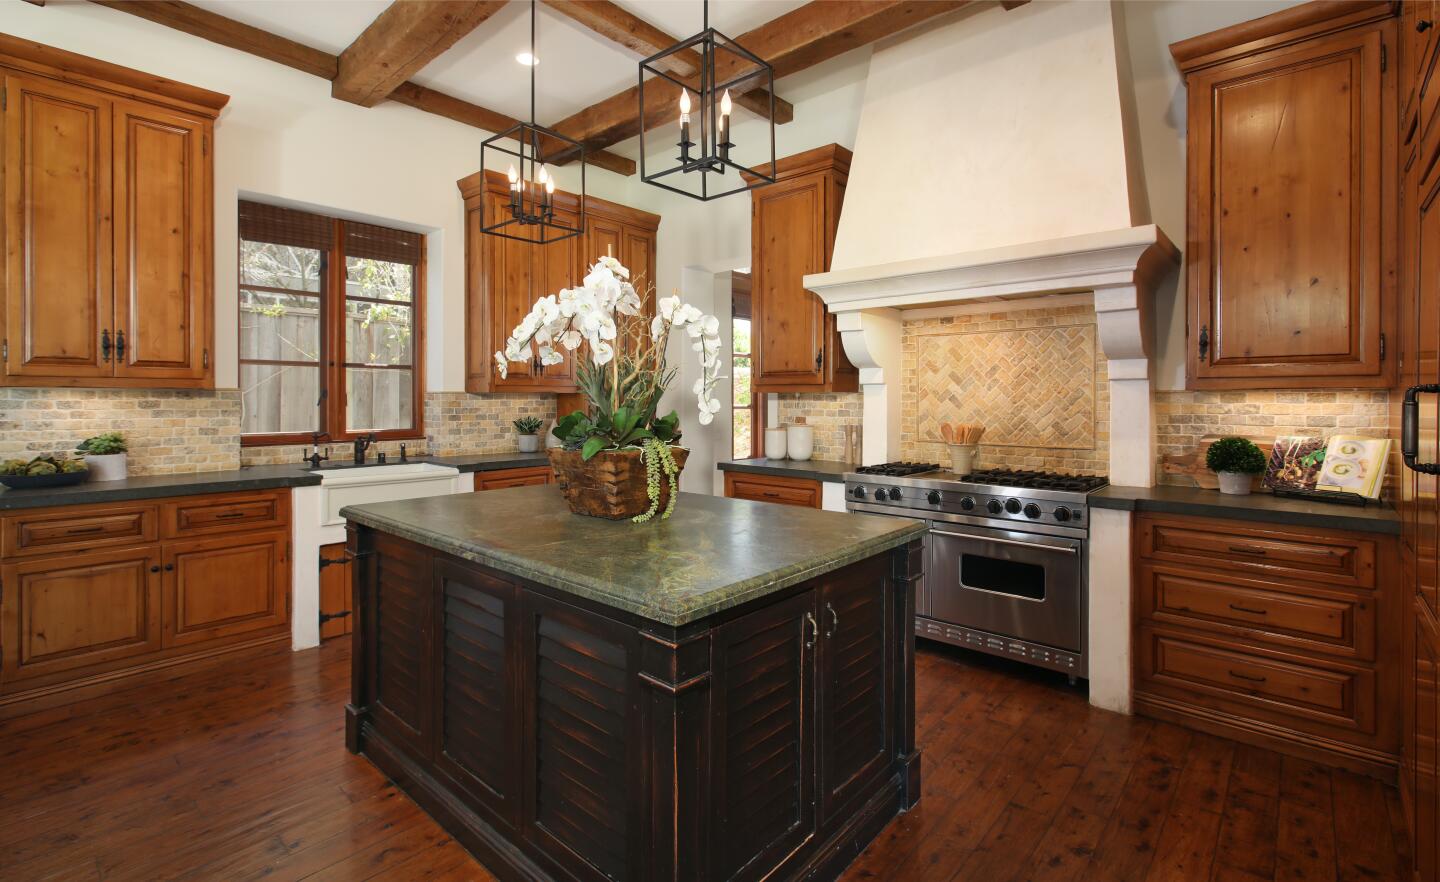 A large island, tile backsplash, wood cabinets and wood floor in the kitchen.